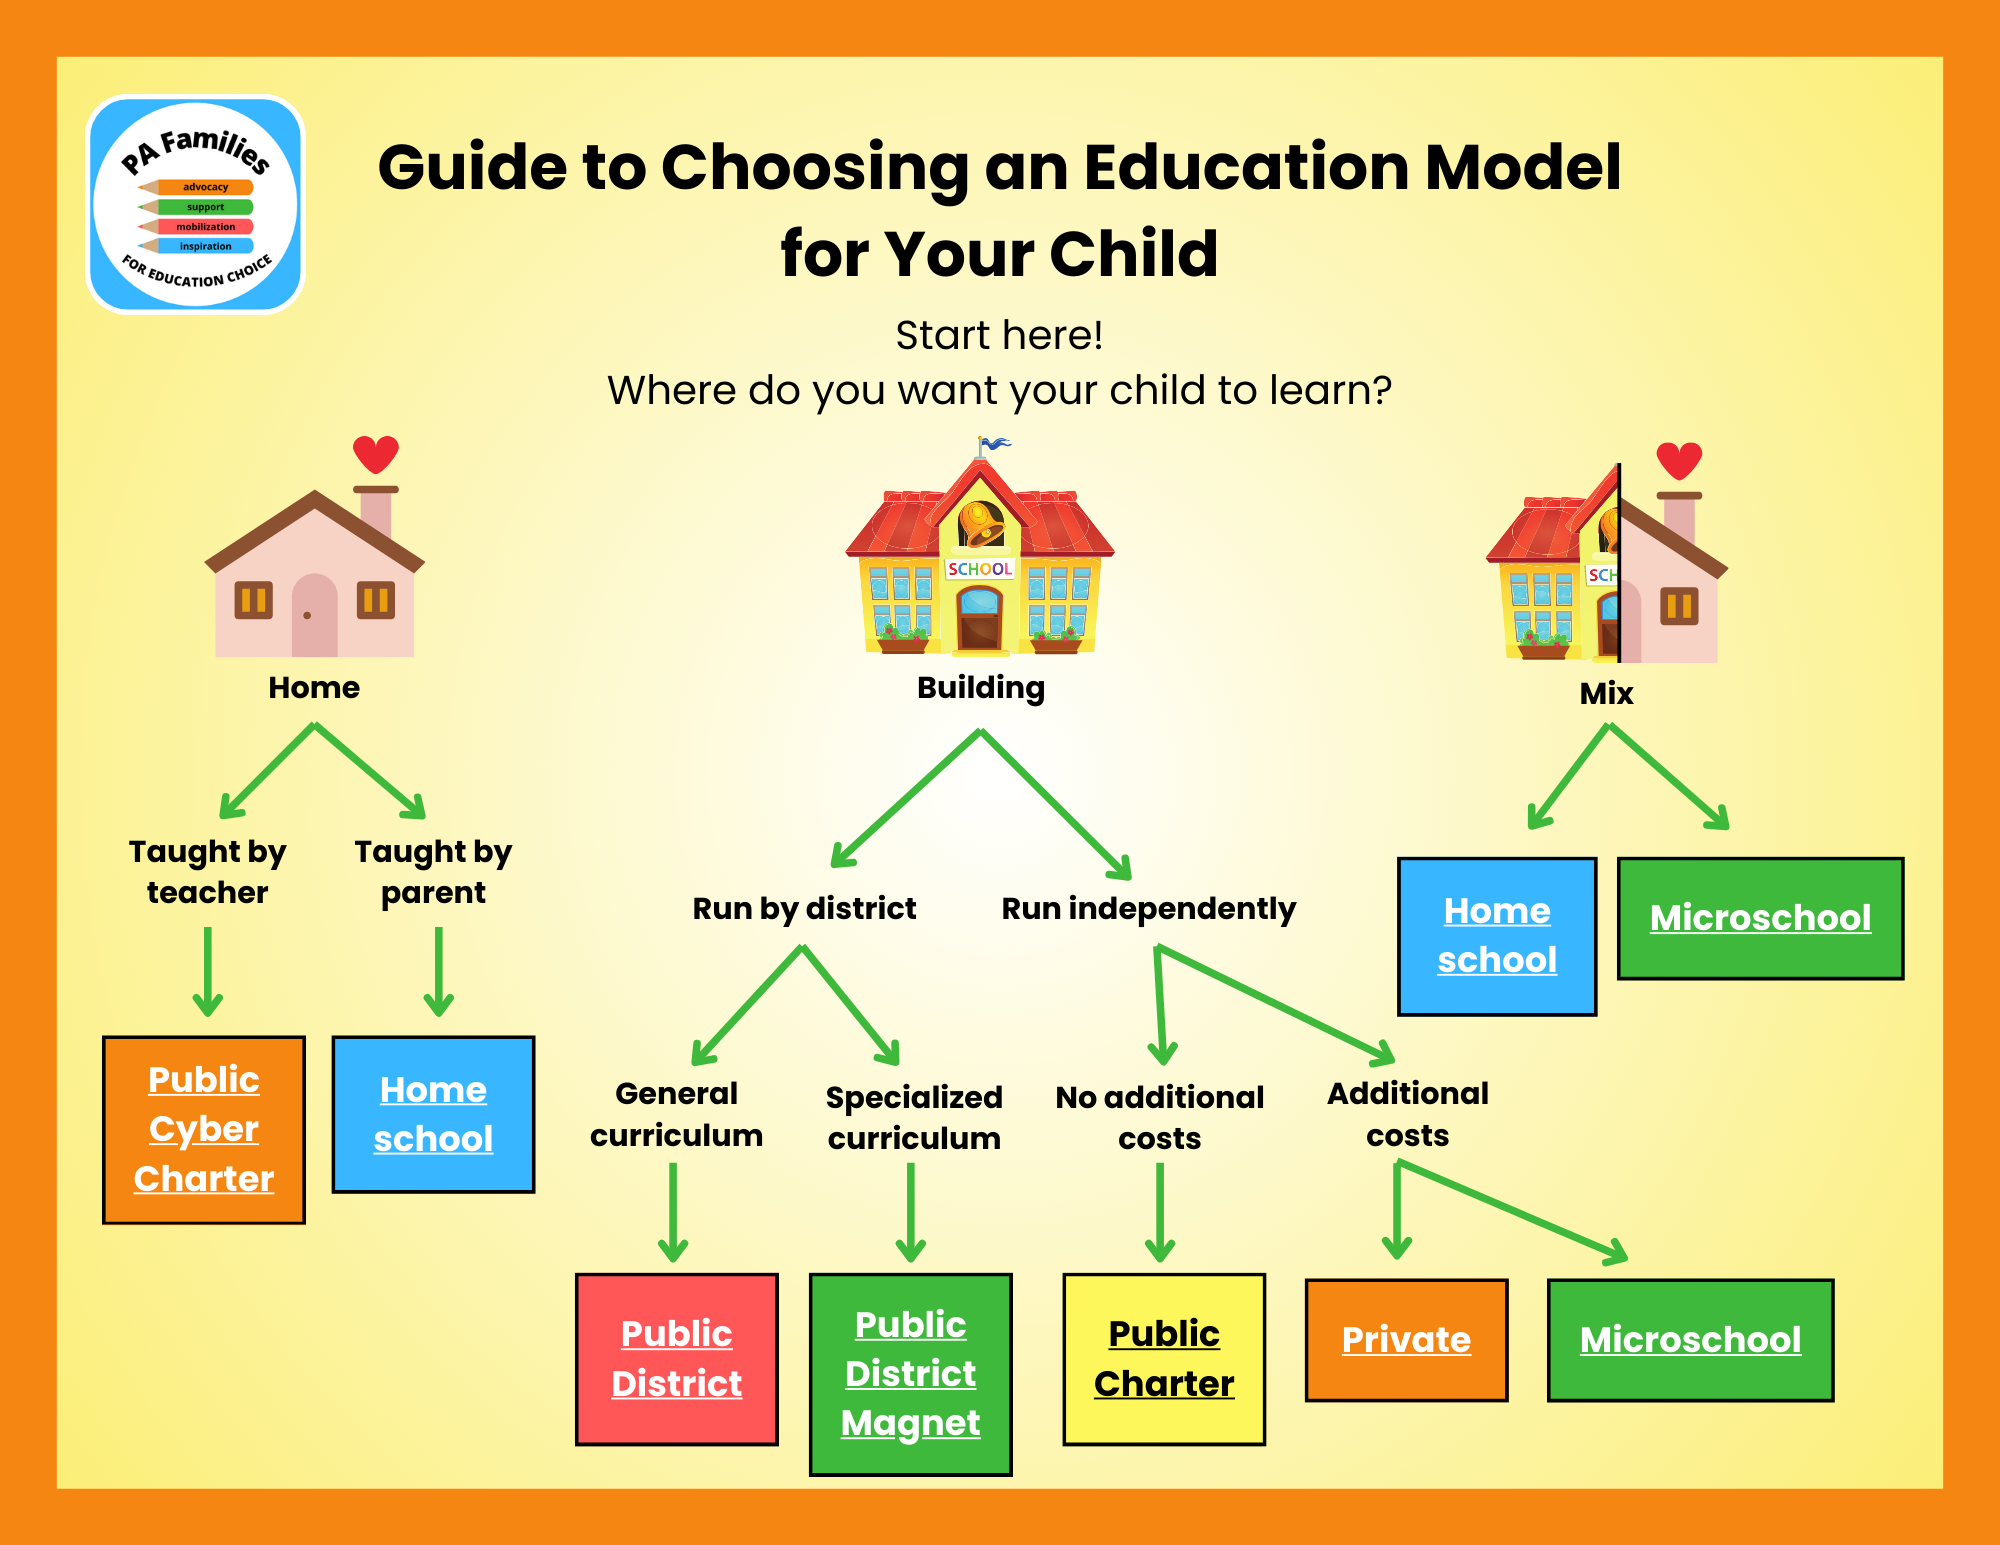 Guide to Choosing and Educational Model for Your Child